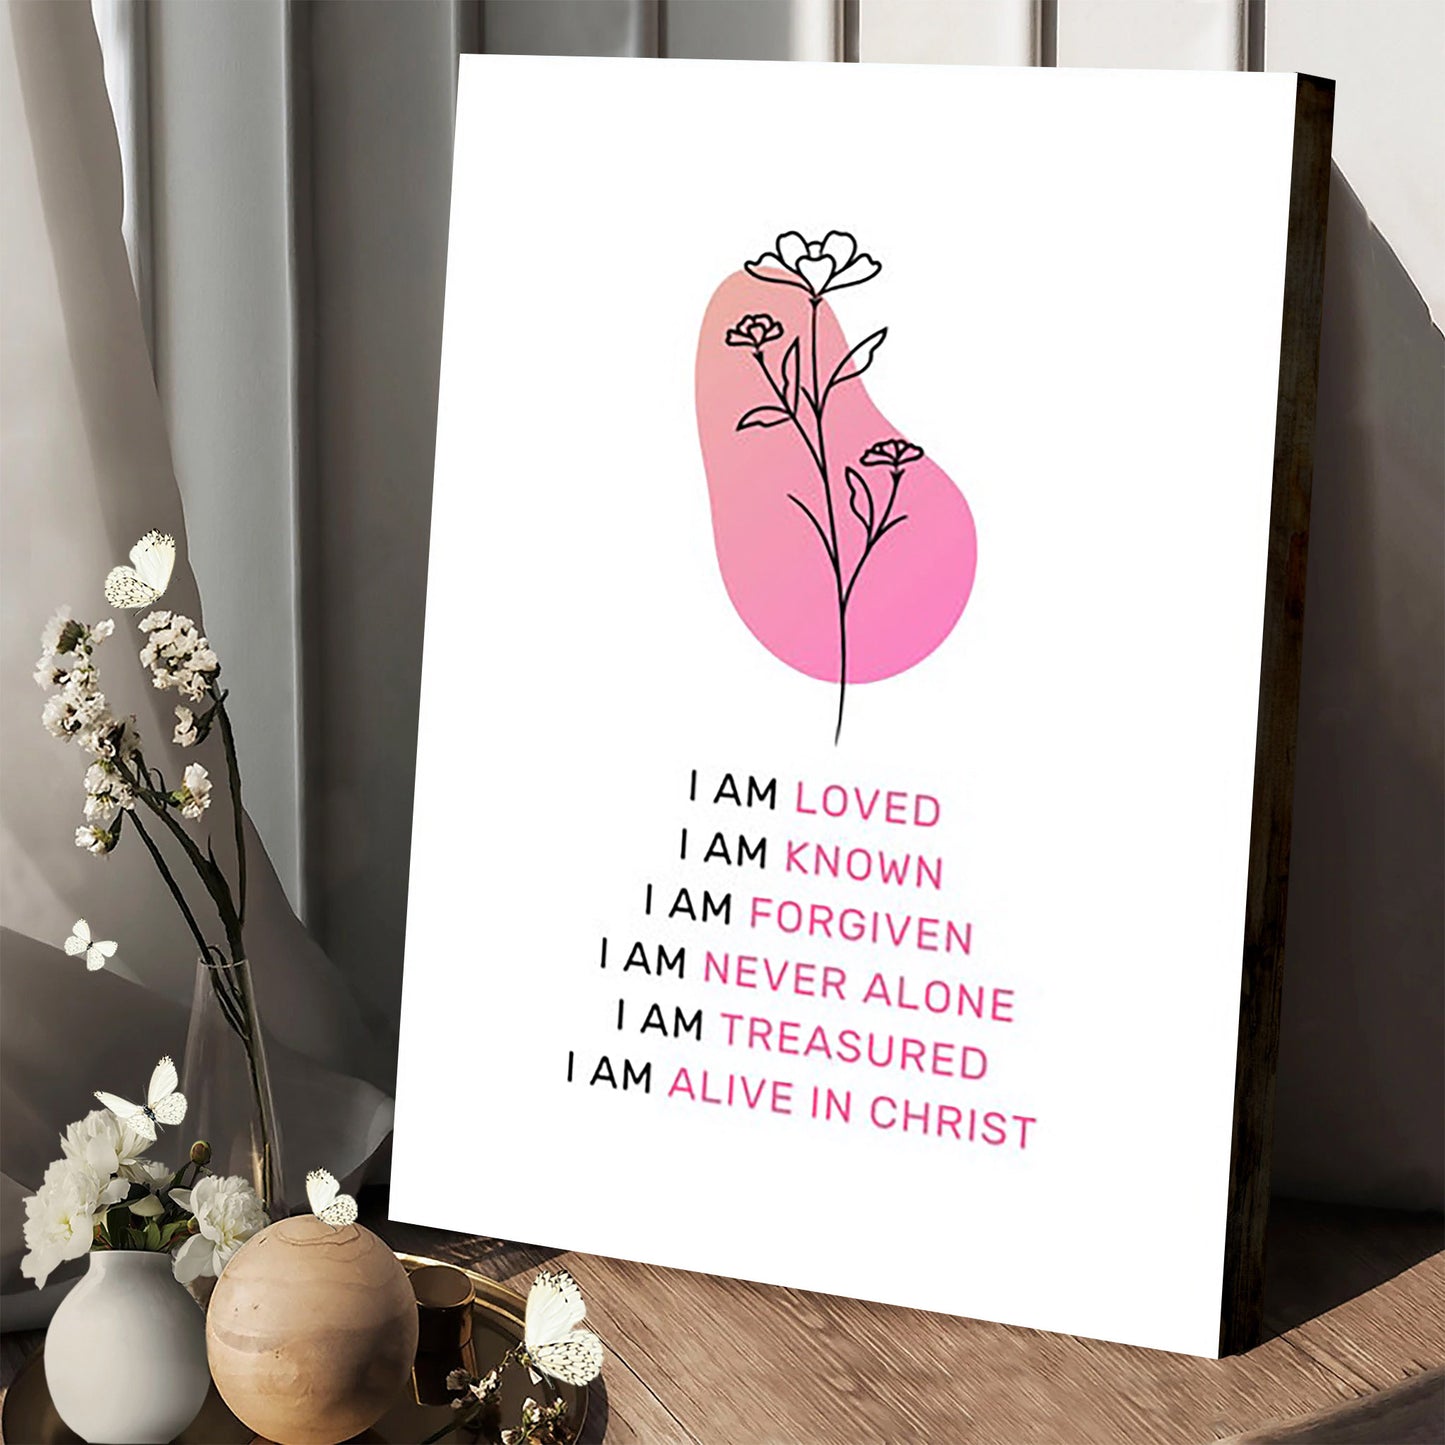 I Am Loved I Am Known I Am Forgiven - Jesus Christ Canvas - Christian Wall Art - Religious Canvas Art